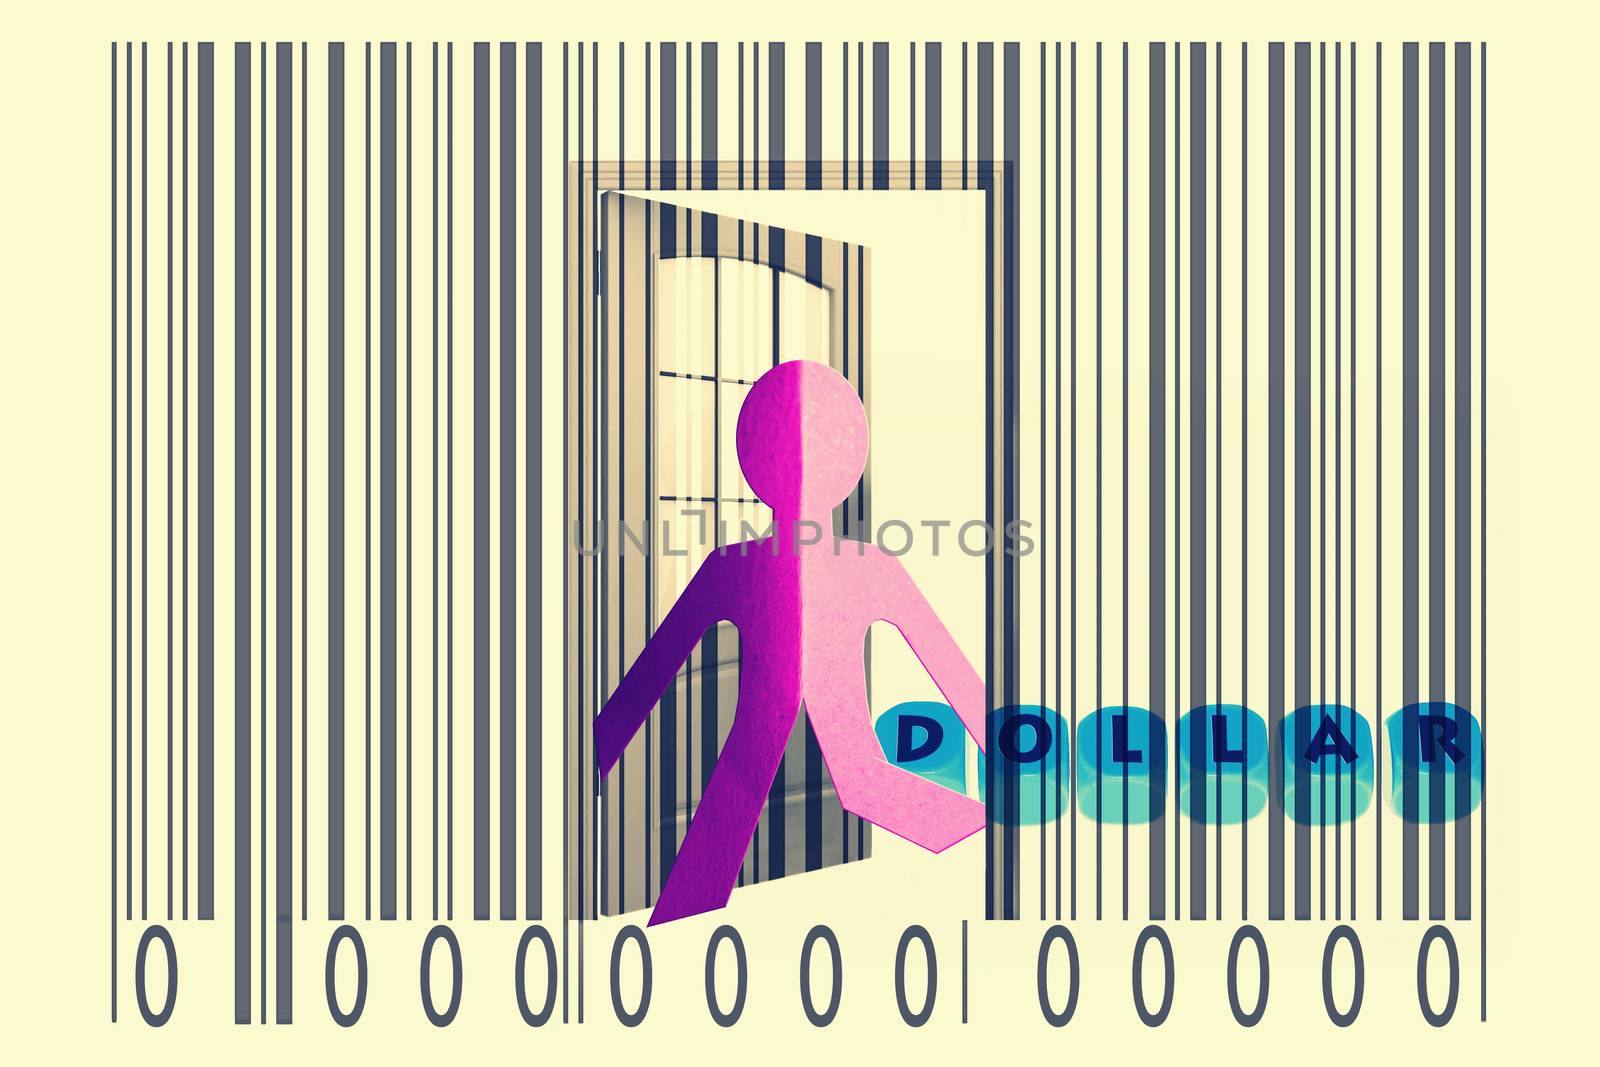 Paperman coming out of a bar code with Dollar word by yands